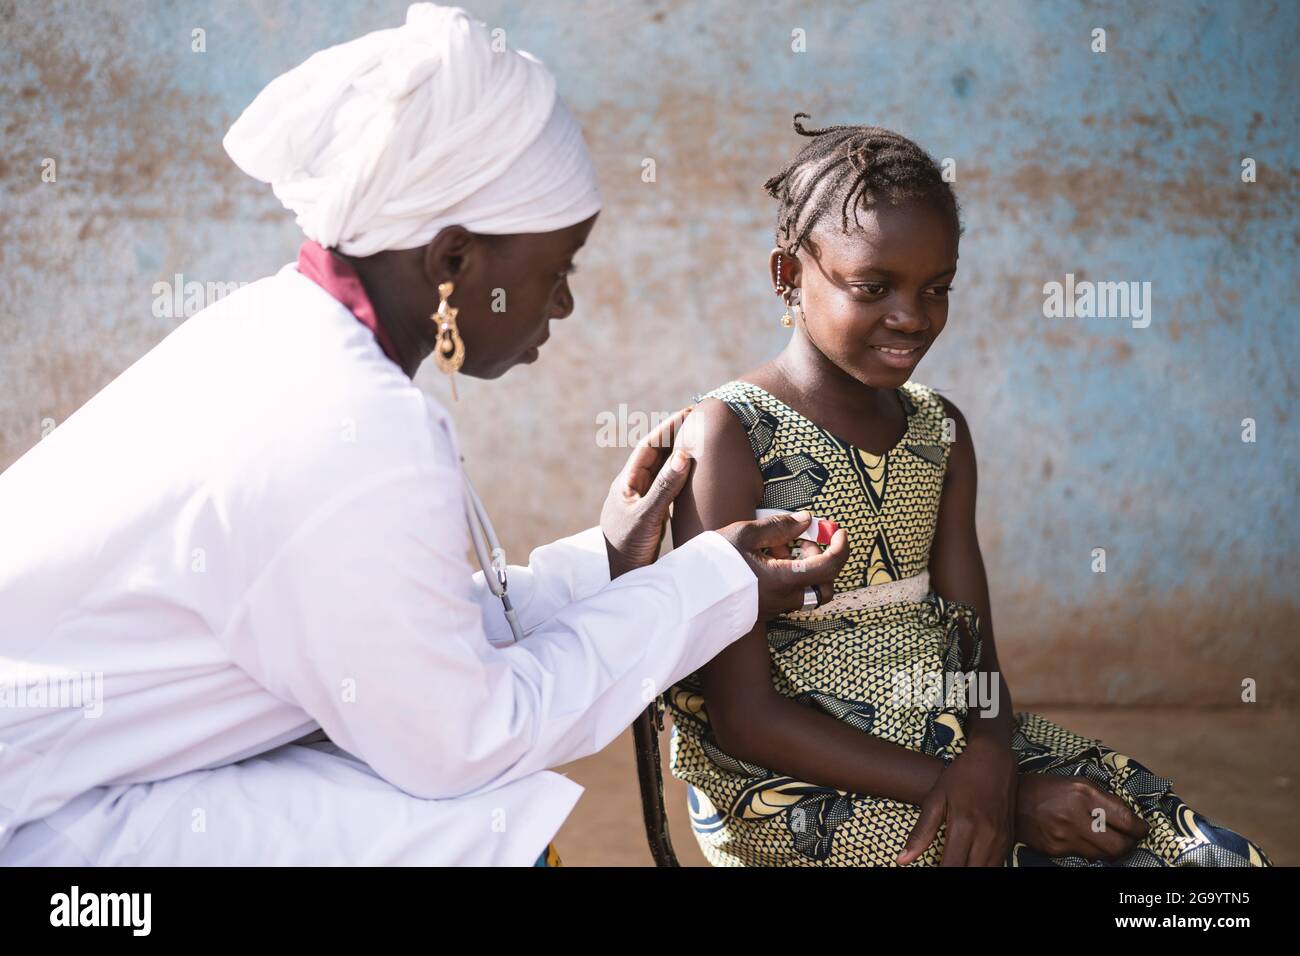 In this image a black female nurse is gently placing a modern digital thermometer under the arm of a smiling little African schoolgirl with fever, in Stock Photo